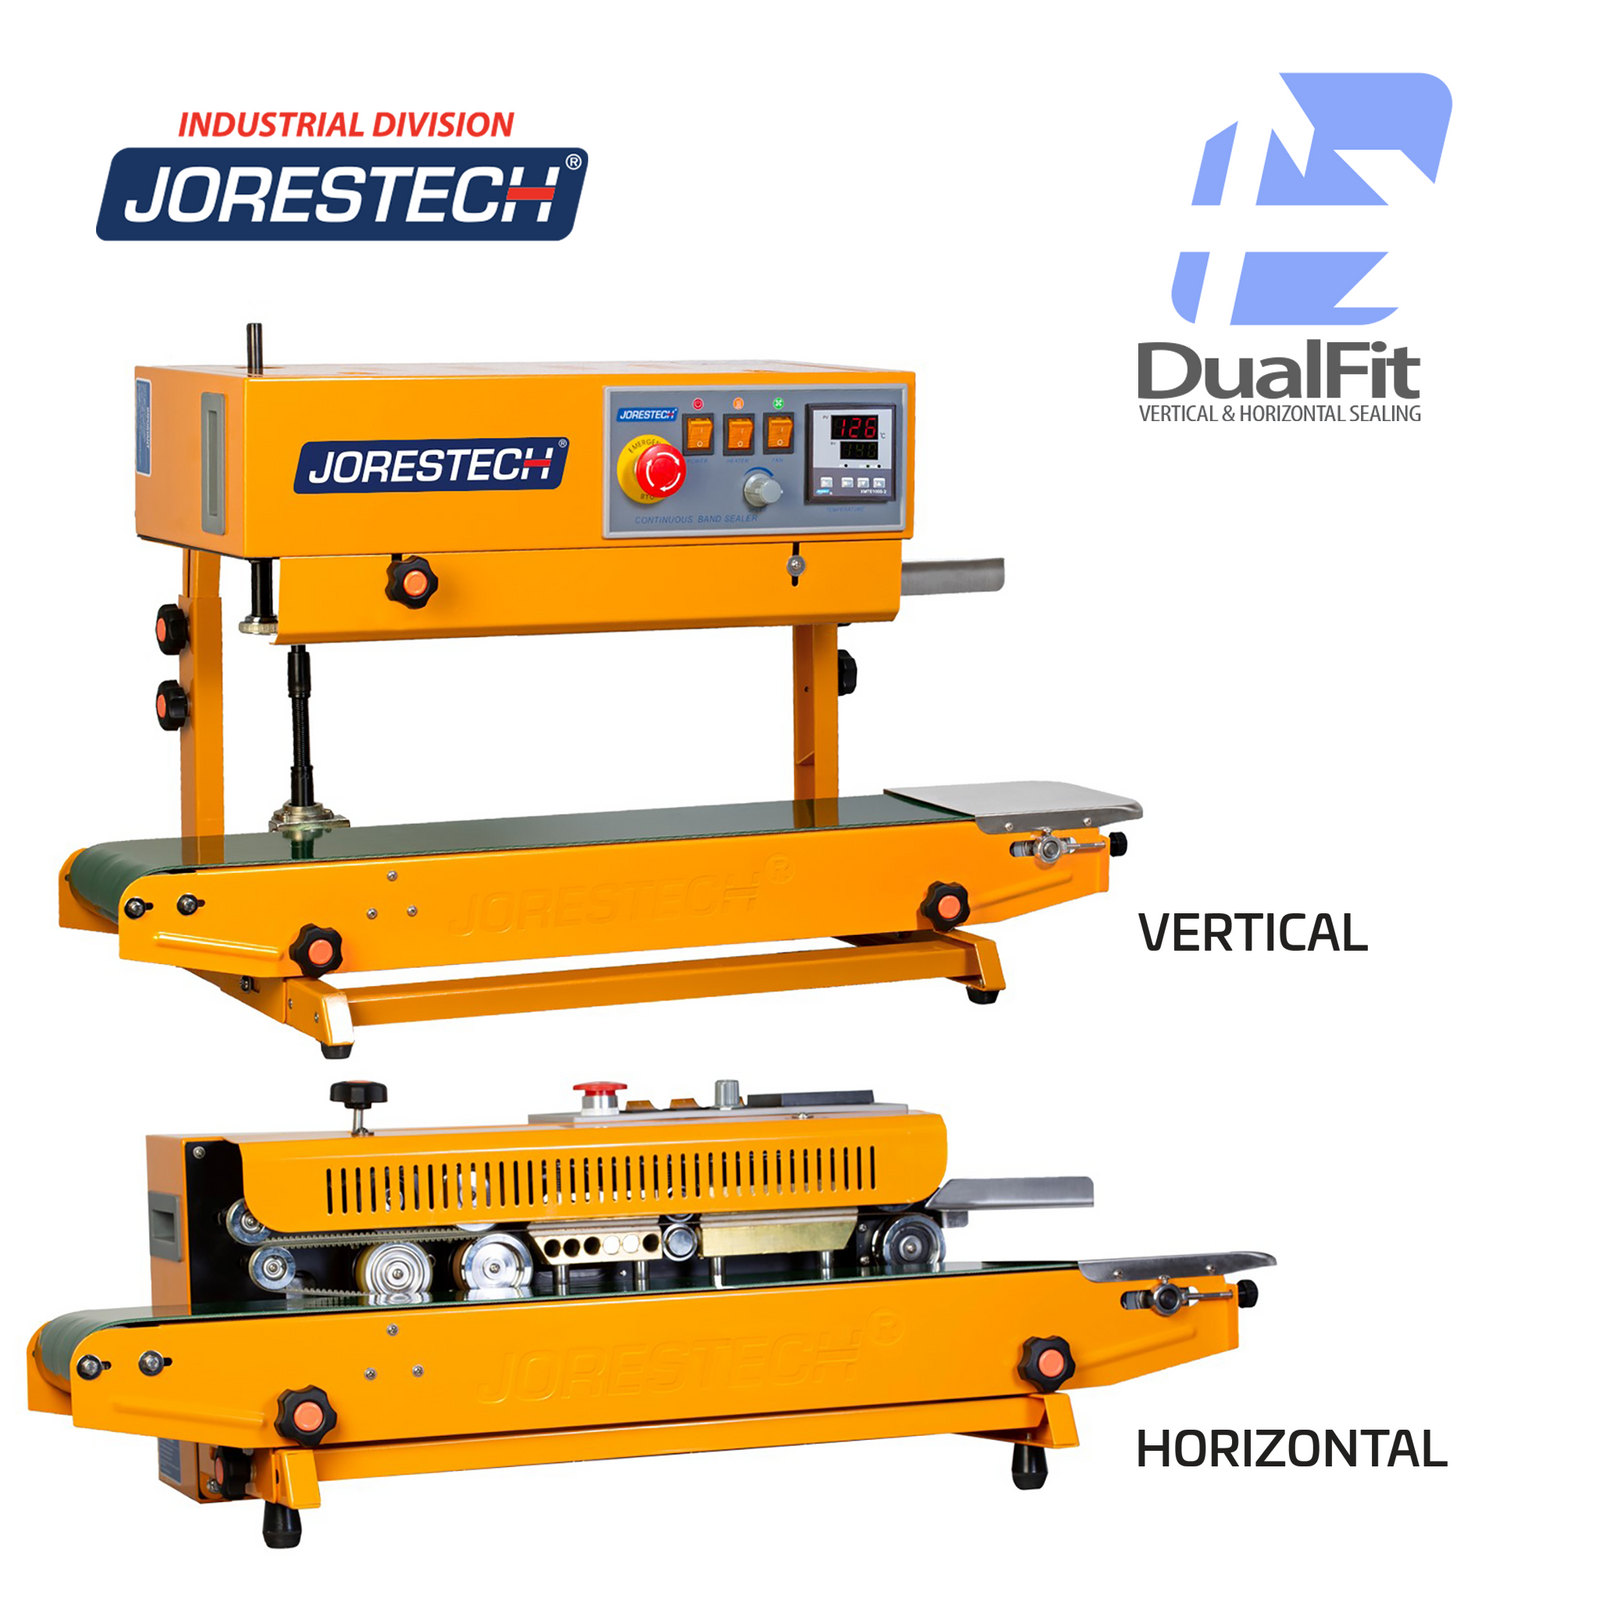 vertical and horizontal positioning of the yellow paint coated JORESTECH continuos band sealer machine. Logo dual fit with arrows is beside the 2 bag sealers to show this JORESTECH bang sealer can be used for vertical and for horizontal applications.